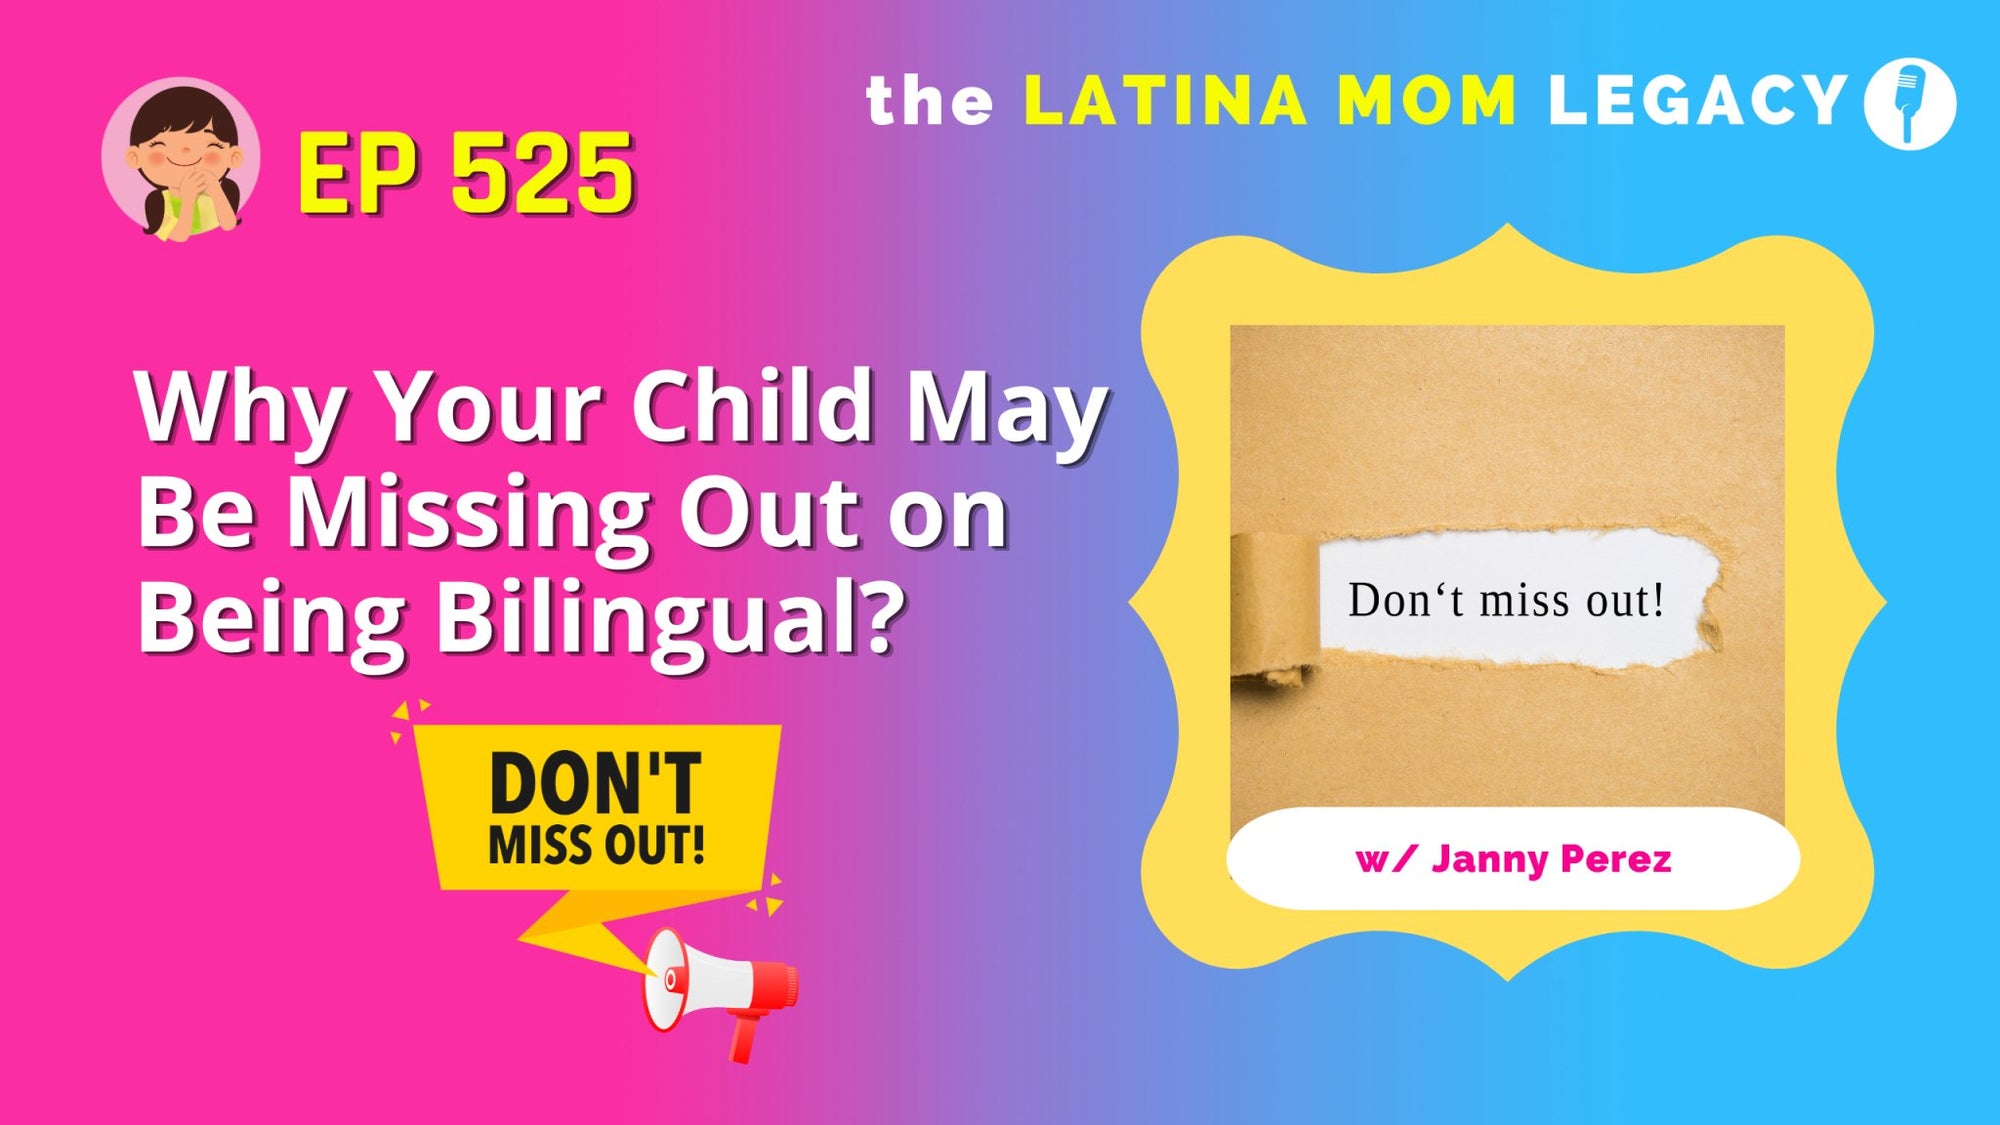 524-Why Your Child May Be Missing Out on Being Bilingual? - Mi LegaSi